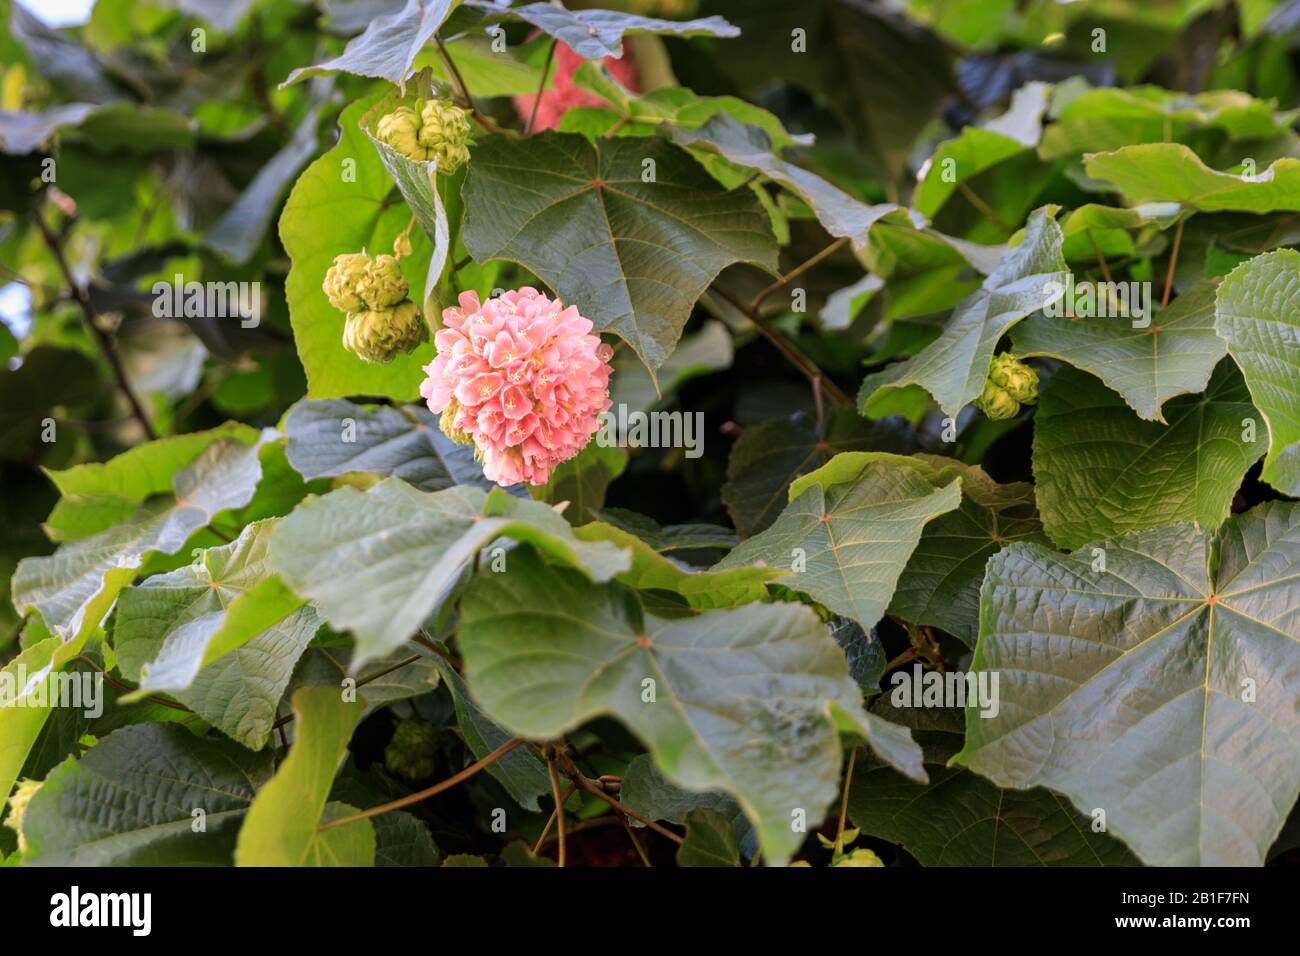 Dombeya wallichii flowering shrub with large pink flowers, Malvaceae family, also pinkball, pink ball tree, or tropical hydrangea, Canary Islands Stock Photo